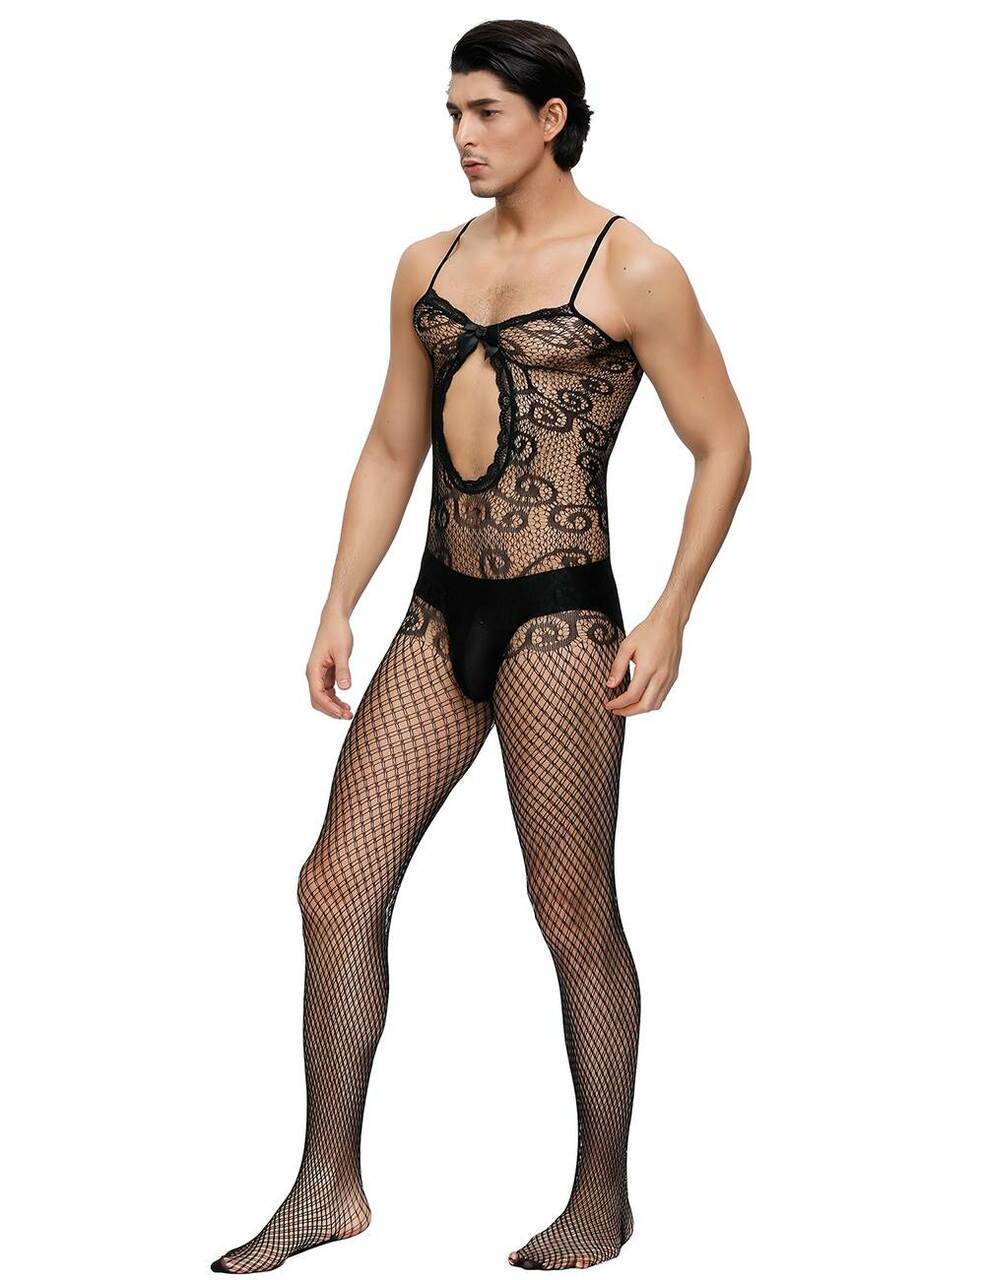 Mens Lingerie Crocheted Fishnet Bodystocking with Keyhole Front Black